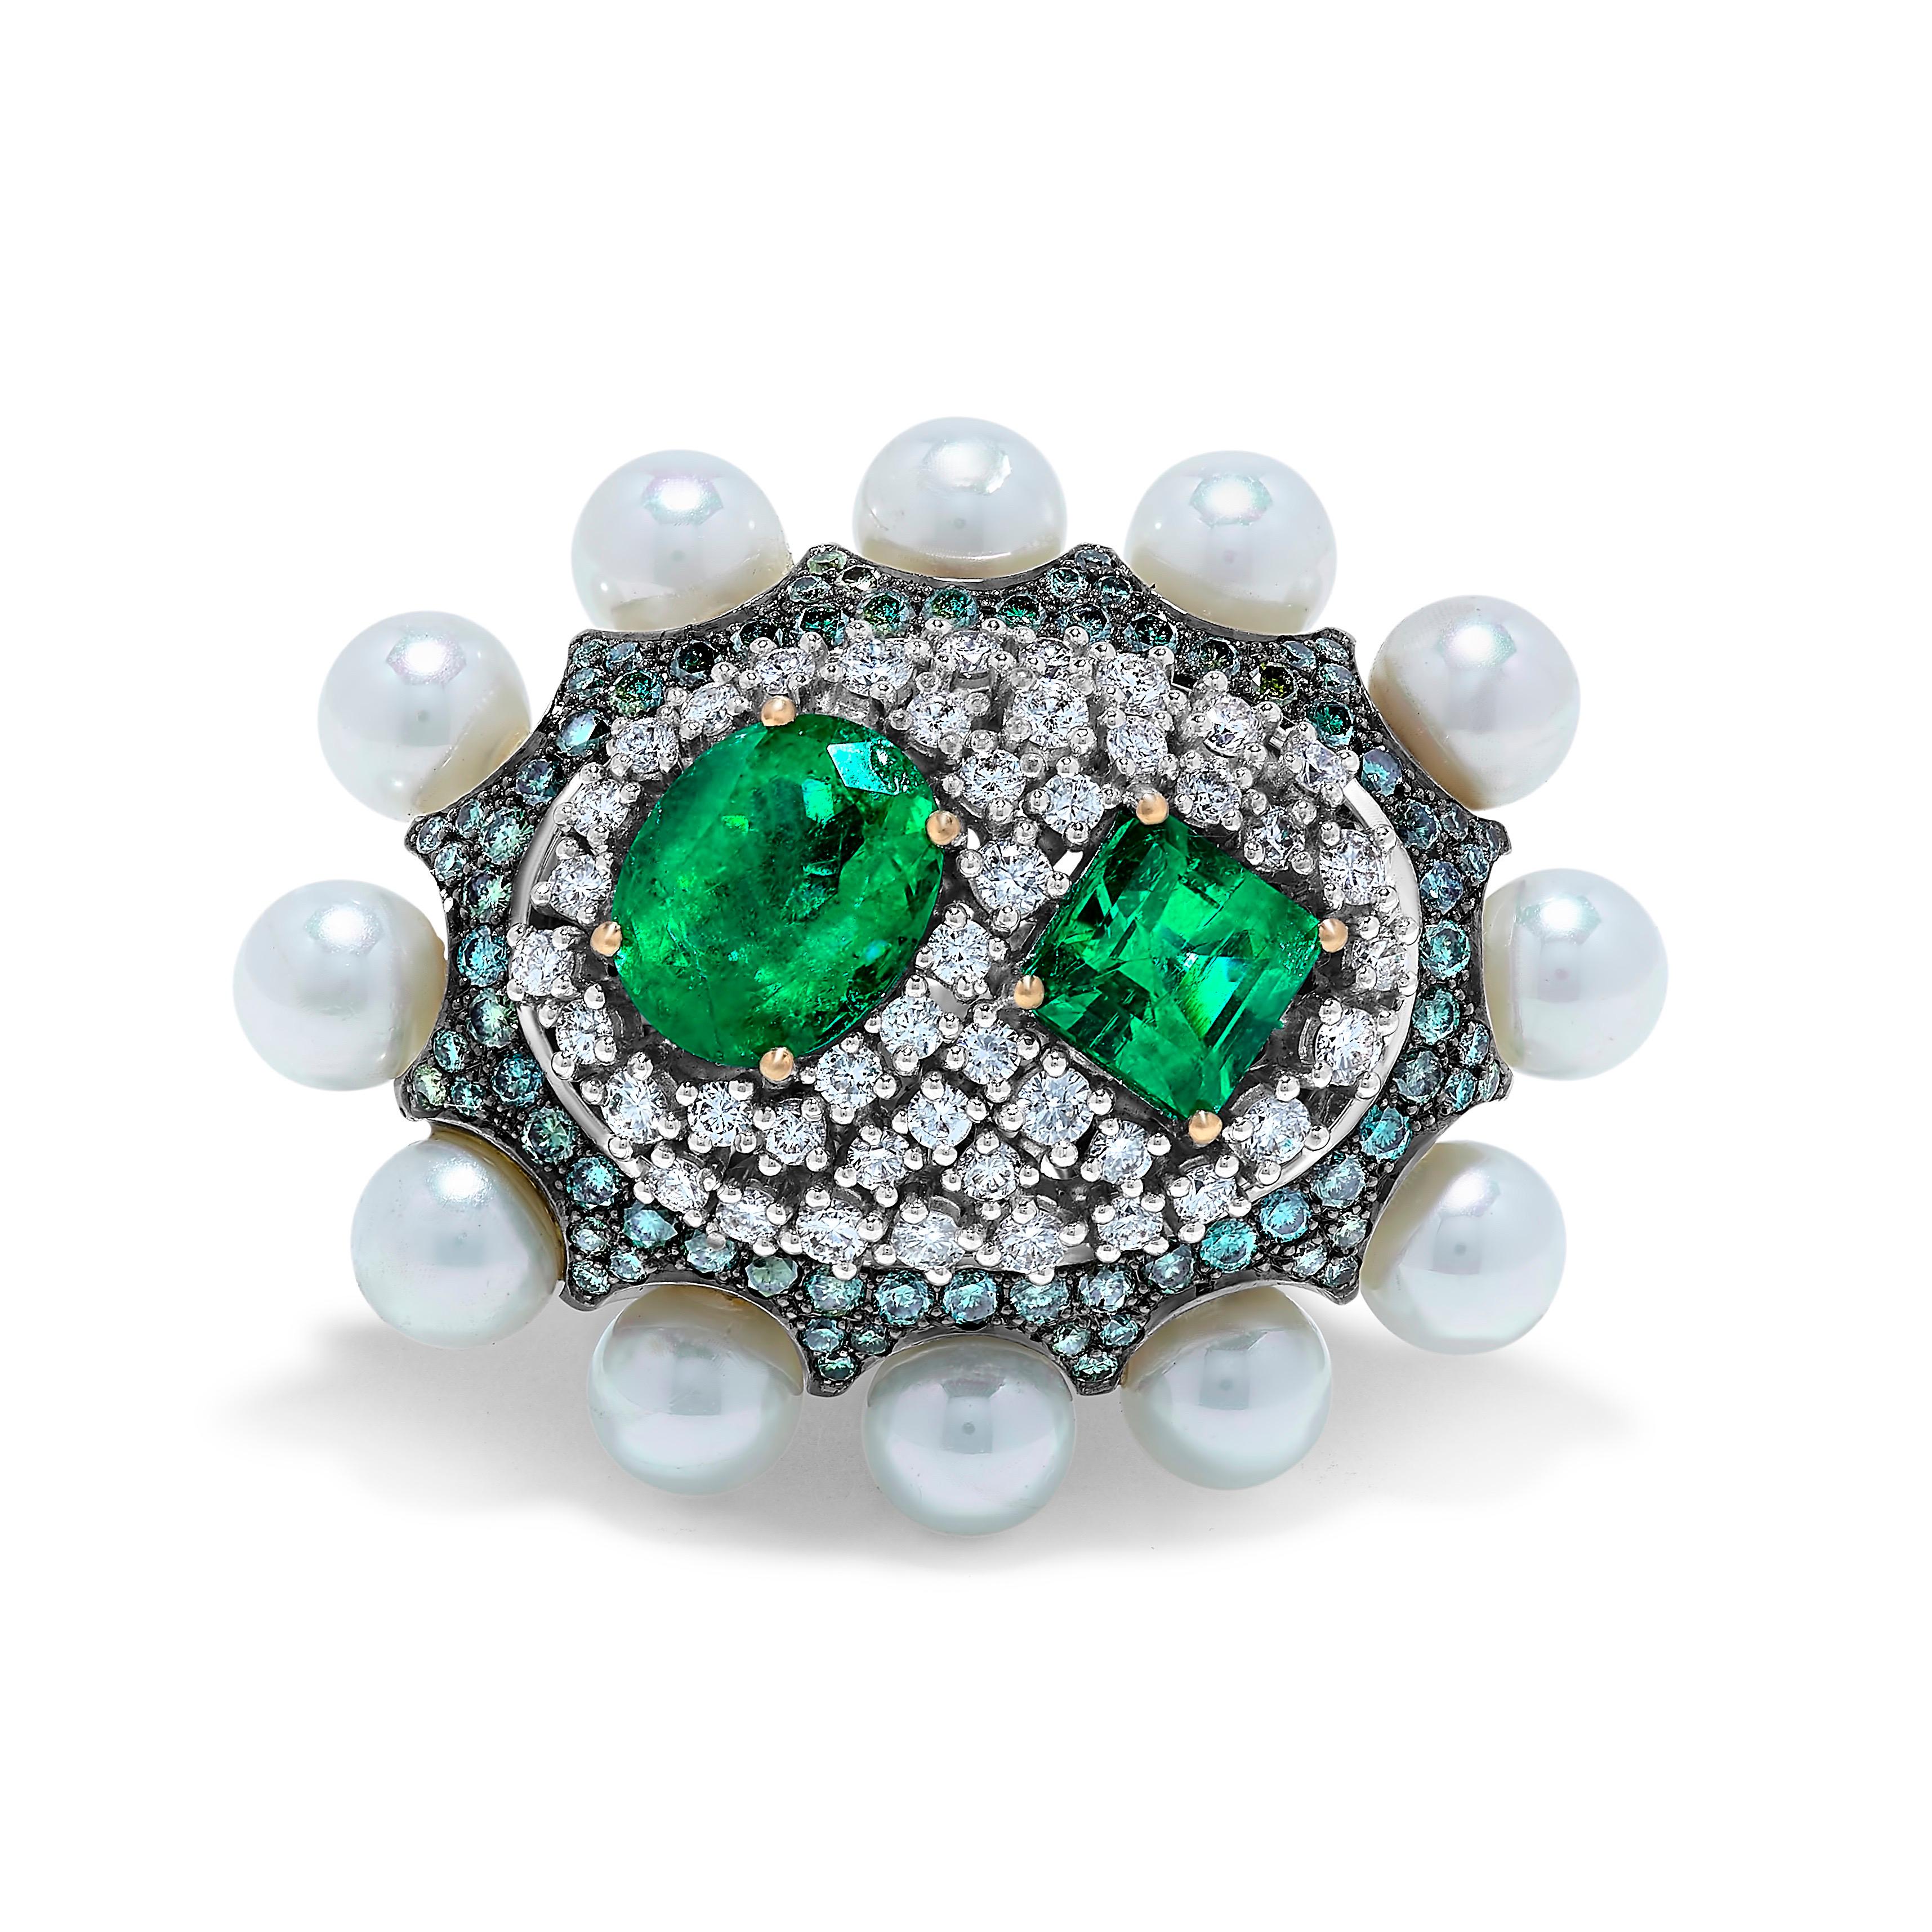 Created by Emilio jewelry New York,
Dare to be different unique style ring featuring the finest Colombian emeralds! 
2 pc Emeralds: appx 4.5 cts
White diamonds 1.5 cts 
Fancy color diamonds 1.5 cts 
